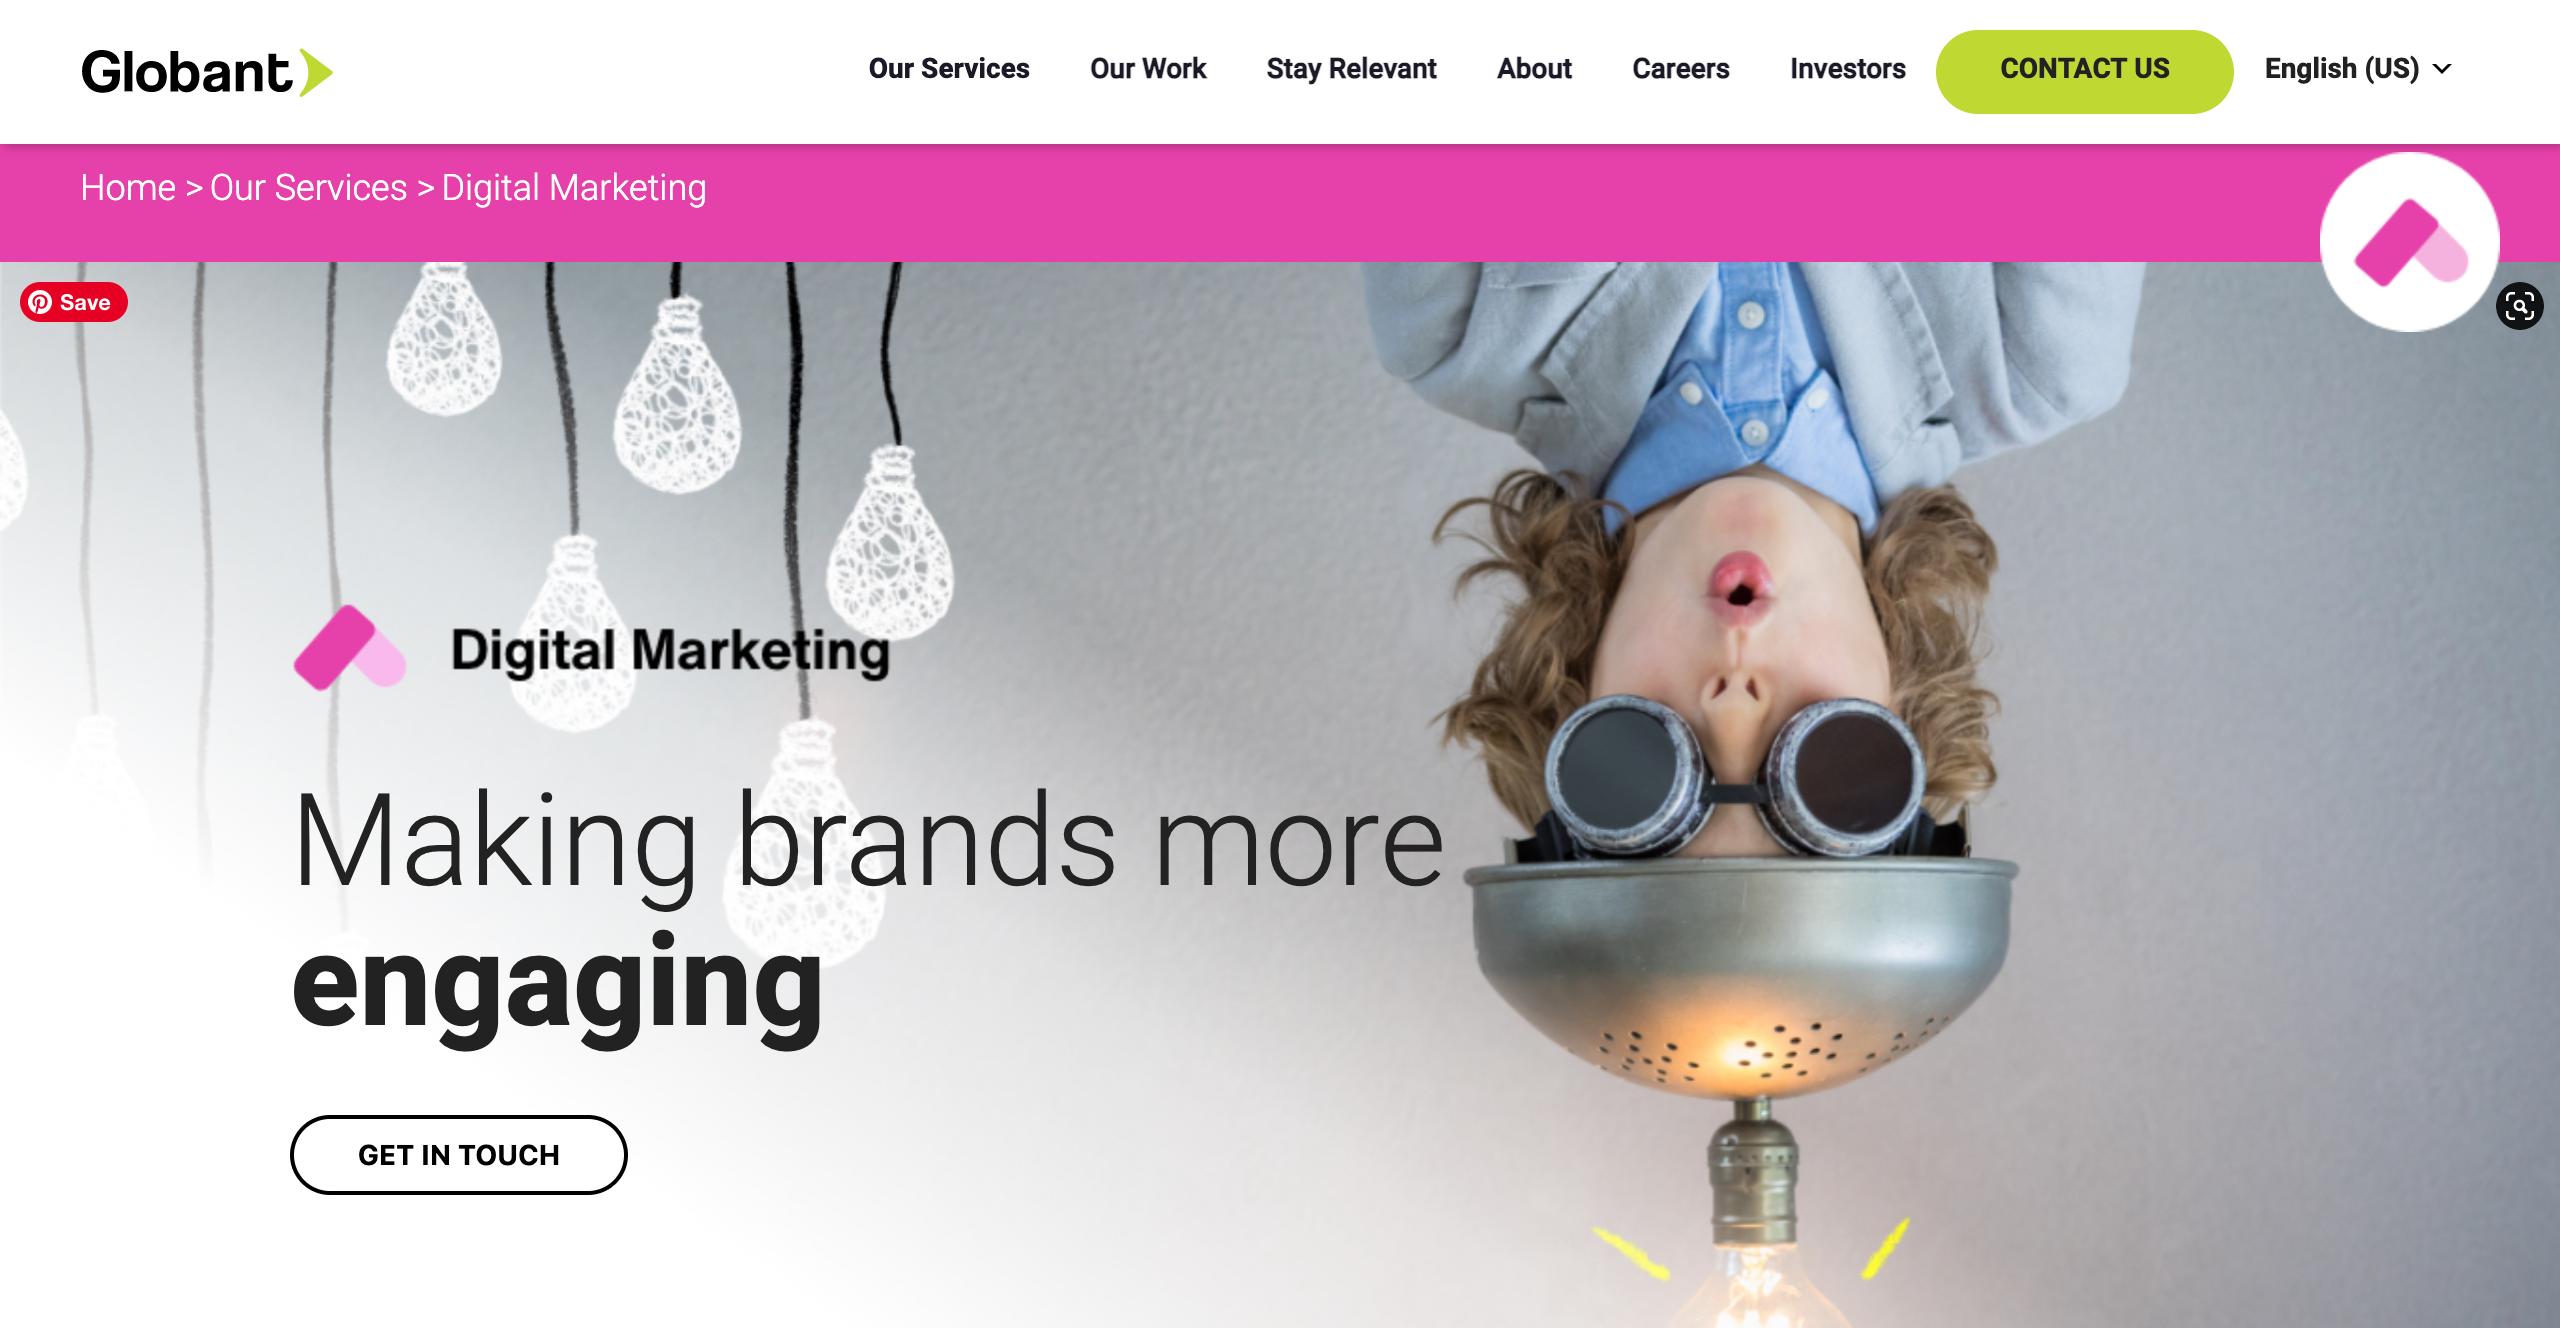 Globant content marketing agency